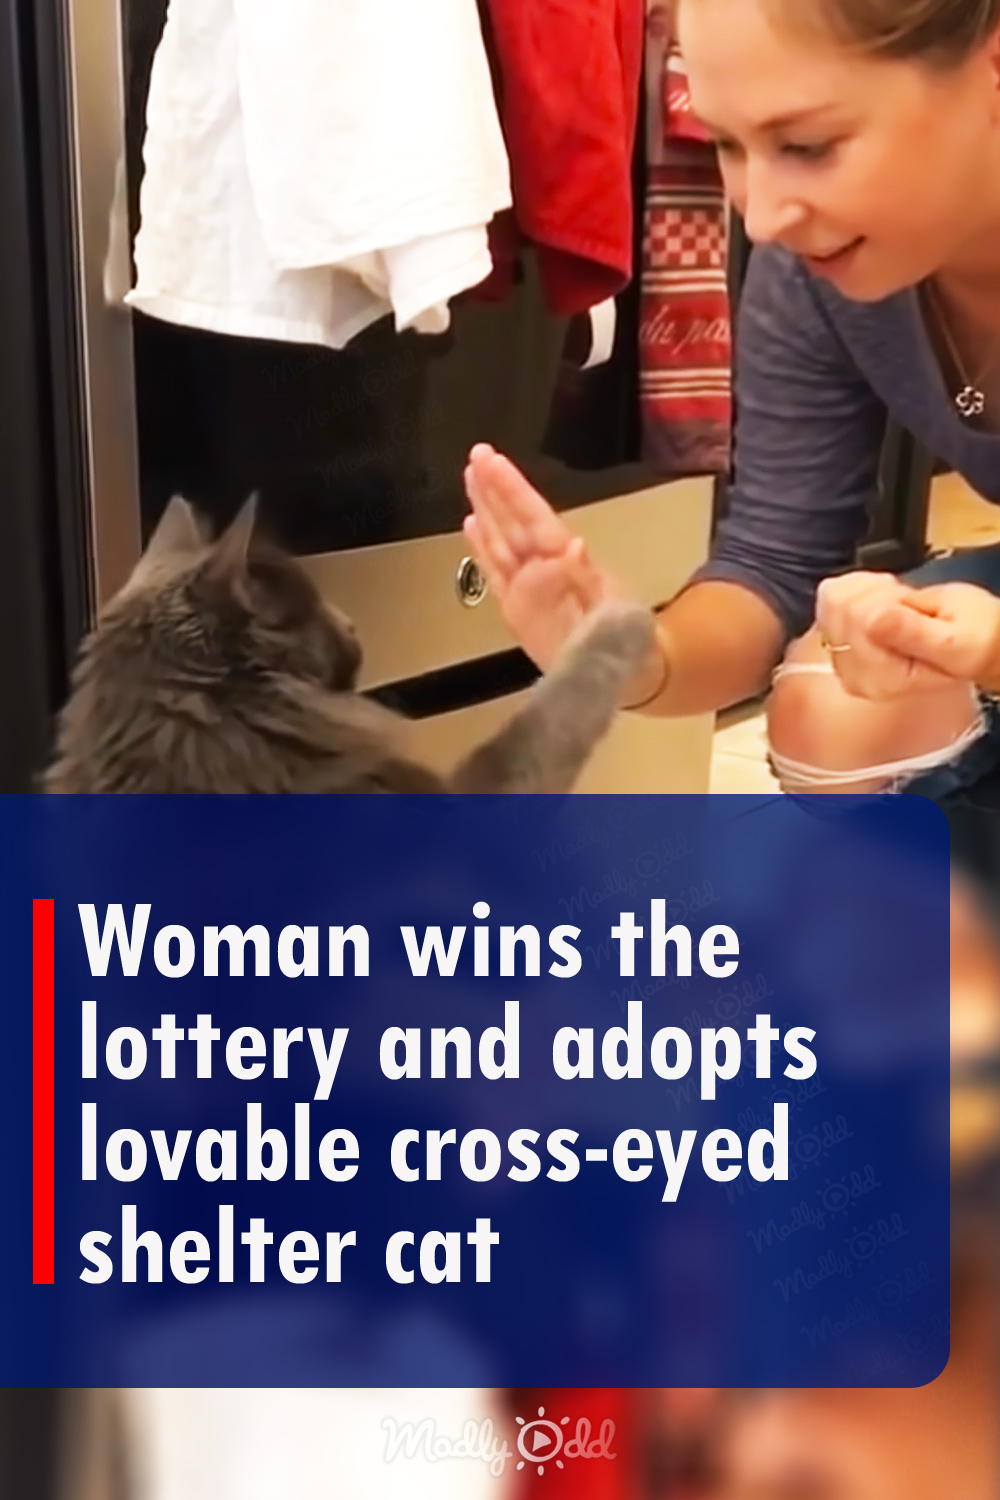 Woman wins the lottery and adopts lovable cross-eyed shelter cat